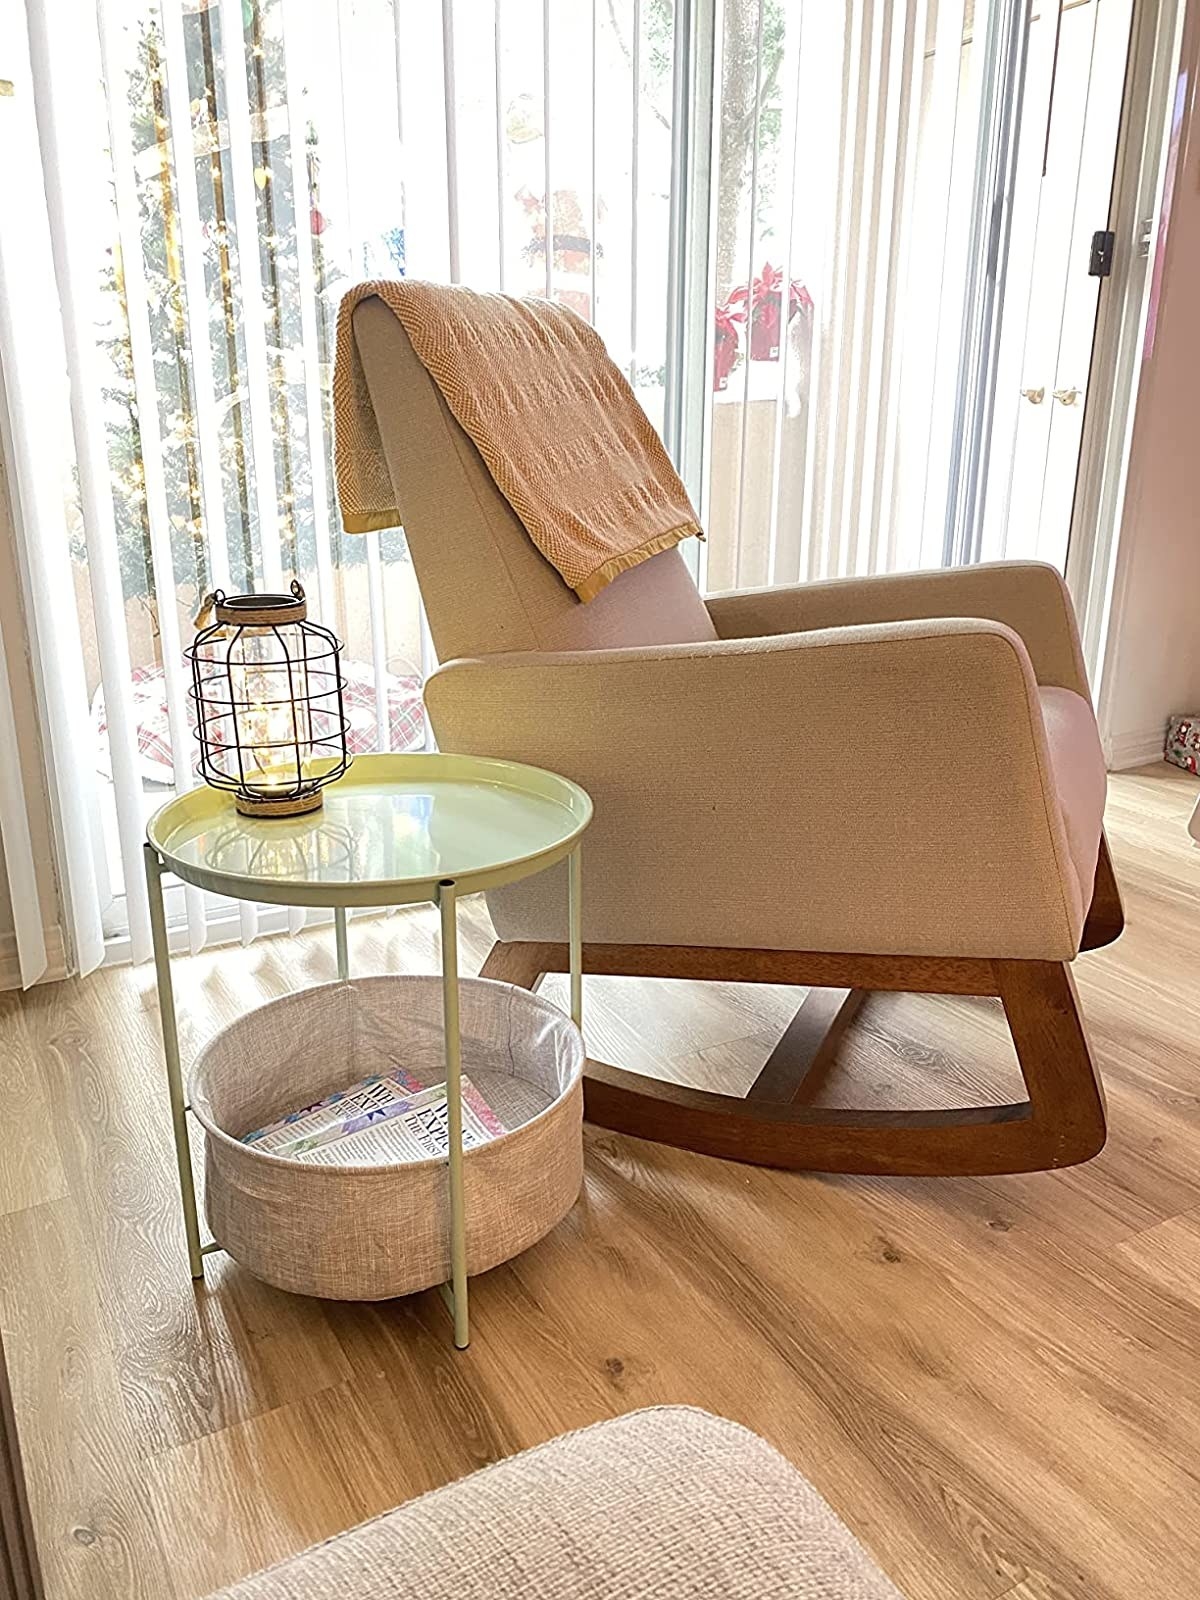 Reviewer image of side table next to a glider in a nursery